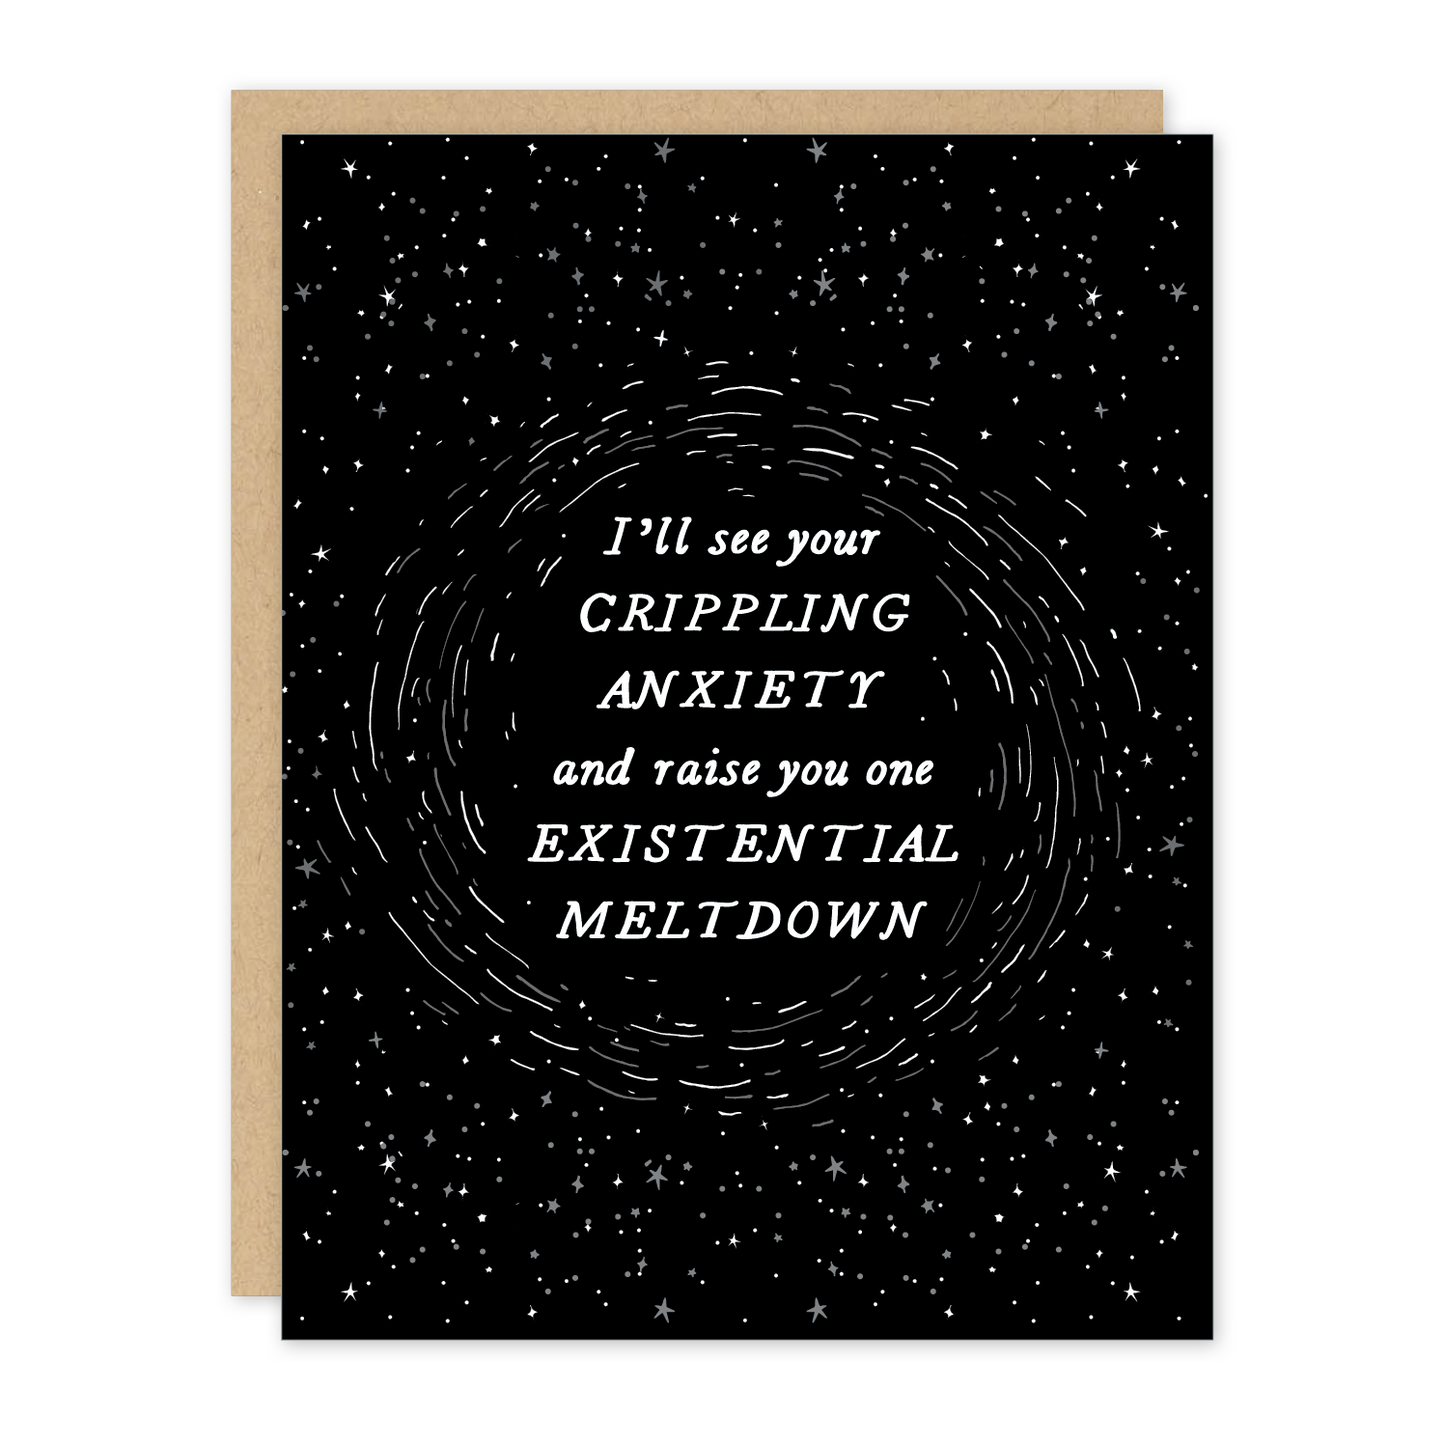 Crippling Anxiety And Raise You One Existential Meltdown Greeting Card